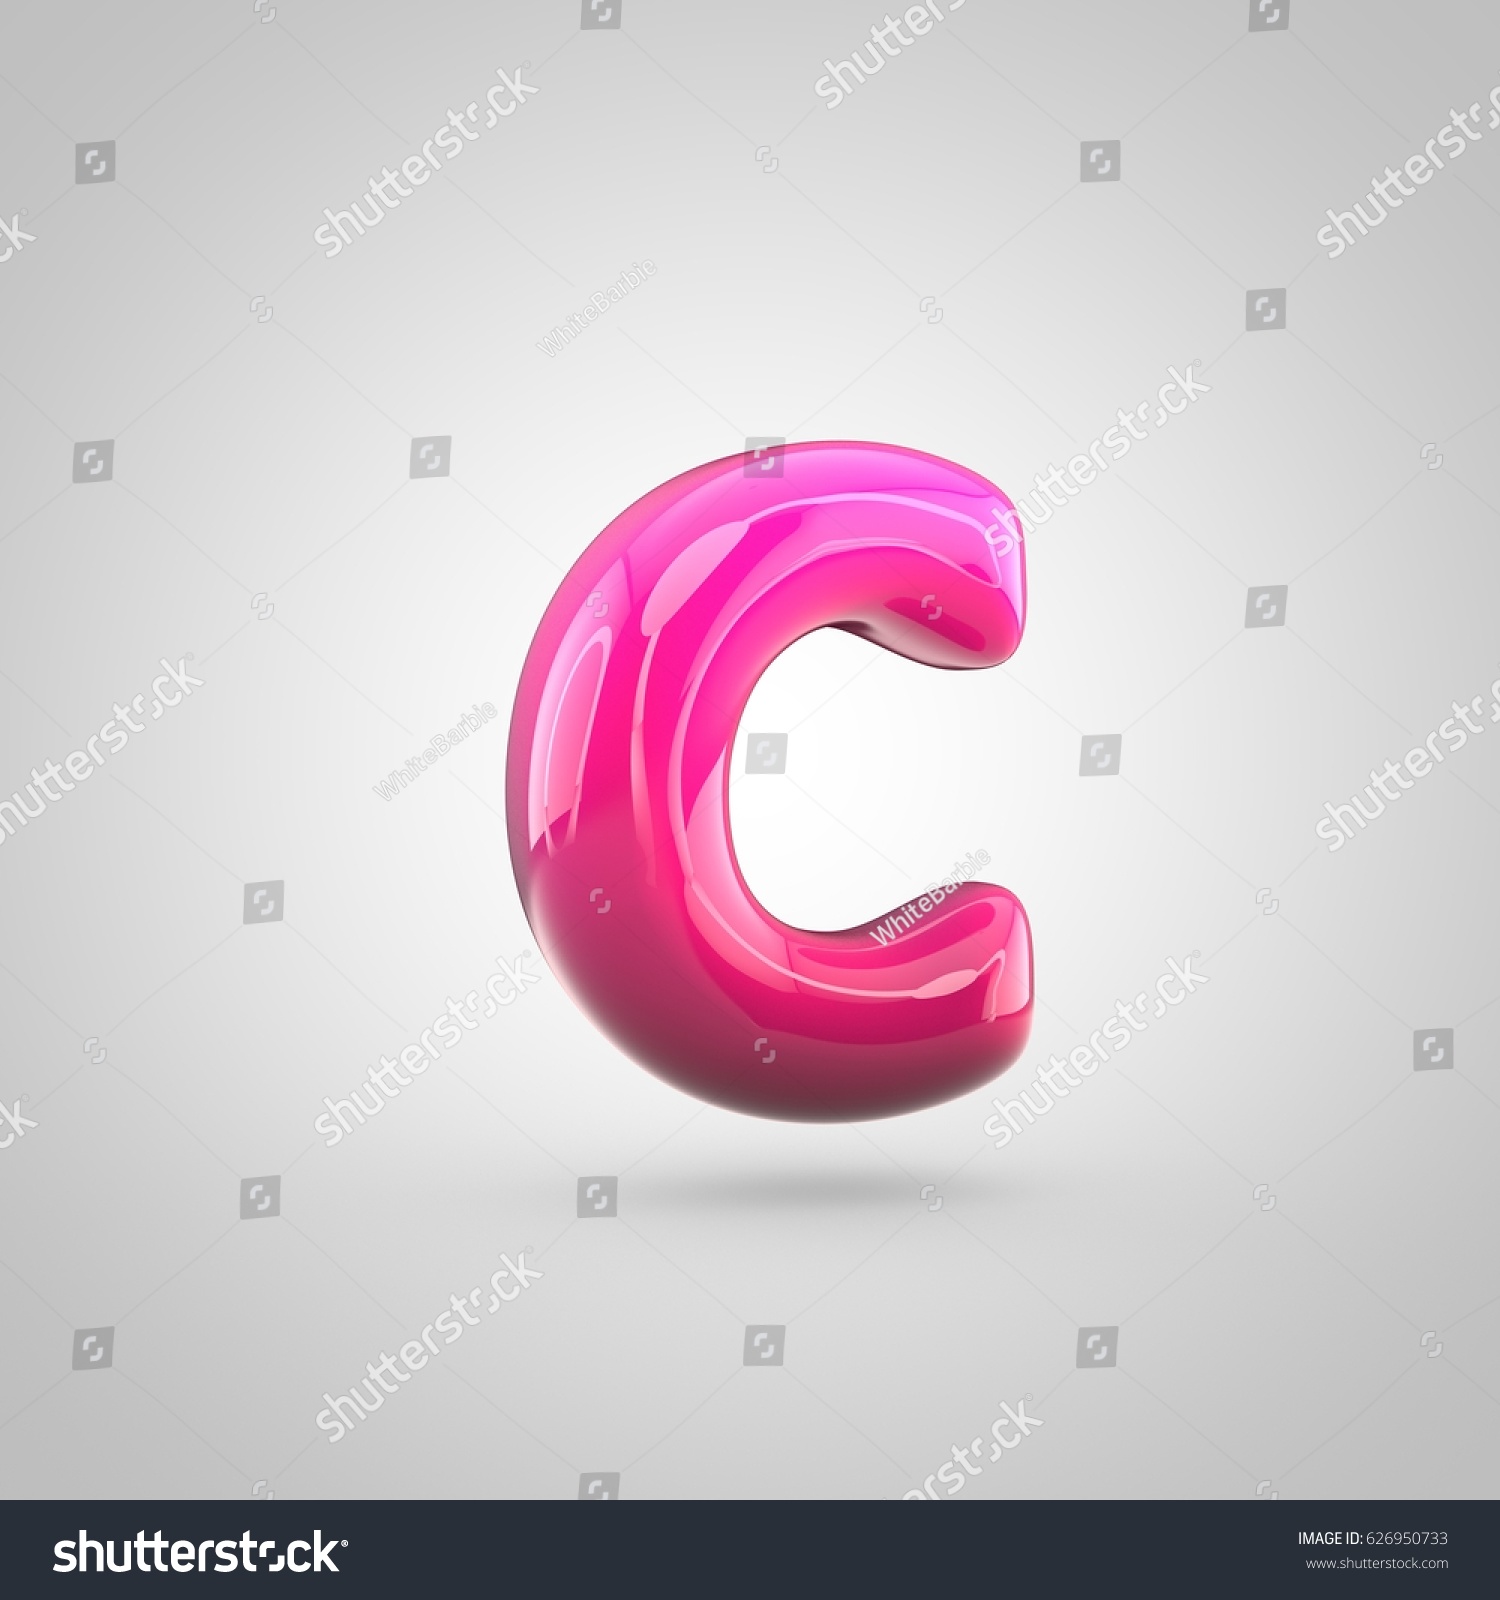 Glossy Red And Pink Gradient Paint Alphabet Letter C Lowercase 3d